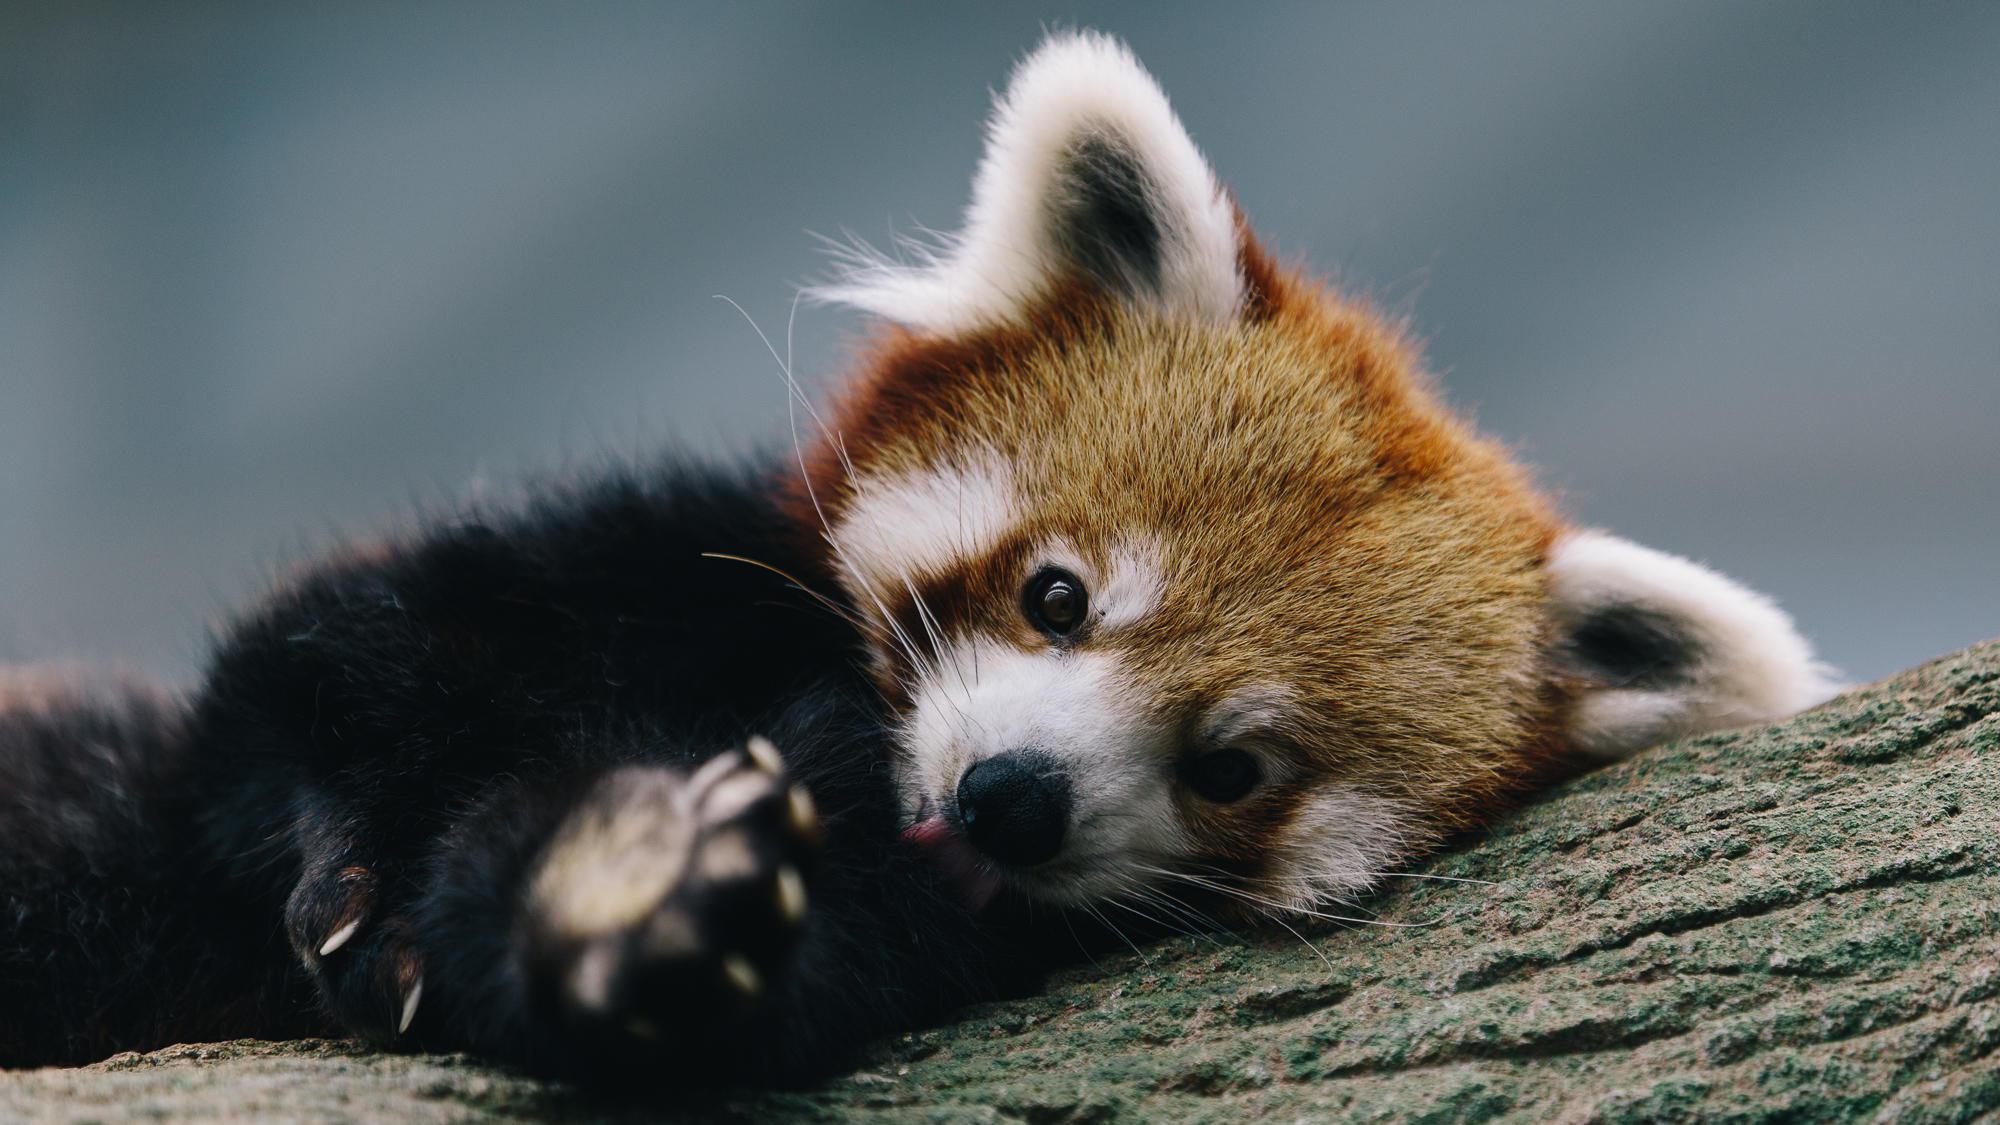 Gallery For Gt Red Pandas Wallpaper